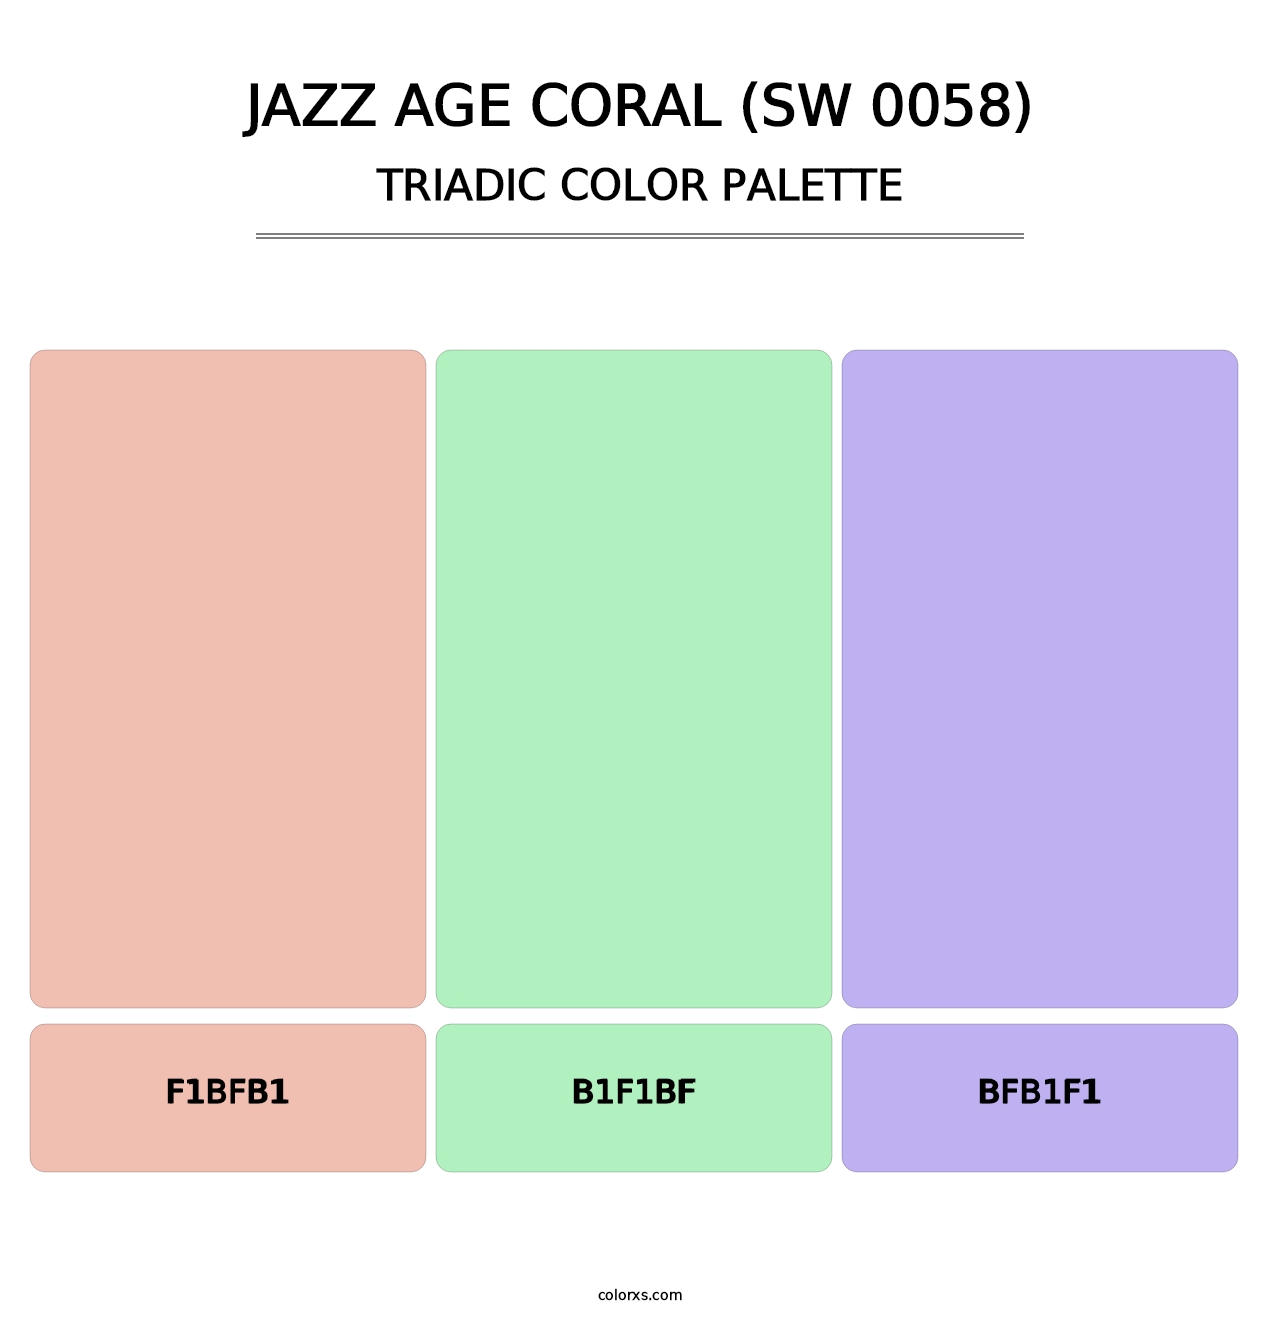 Jazz Age Coral (SW 0058) - Triadic Color Palette